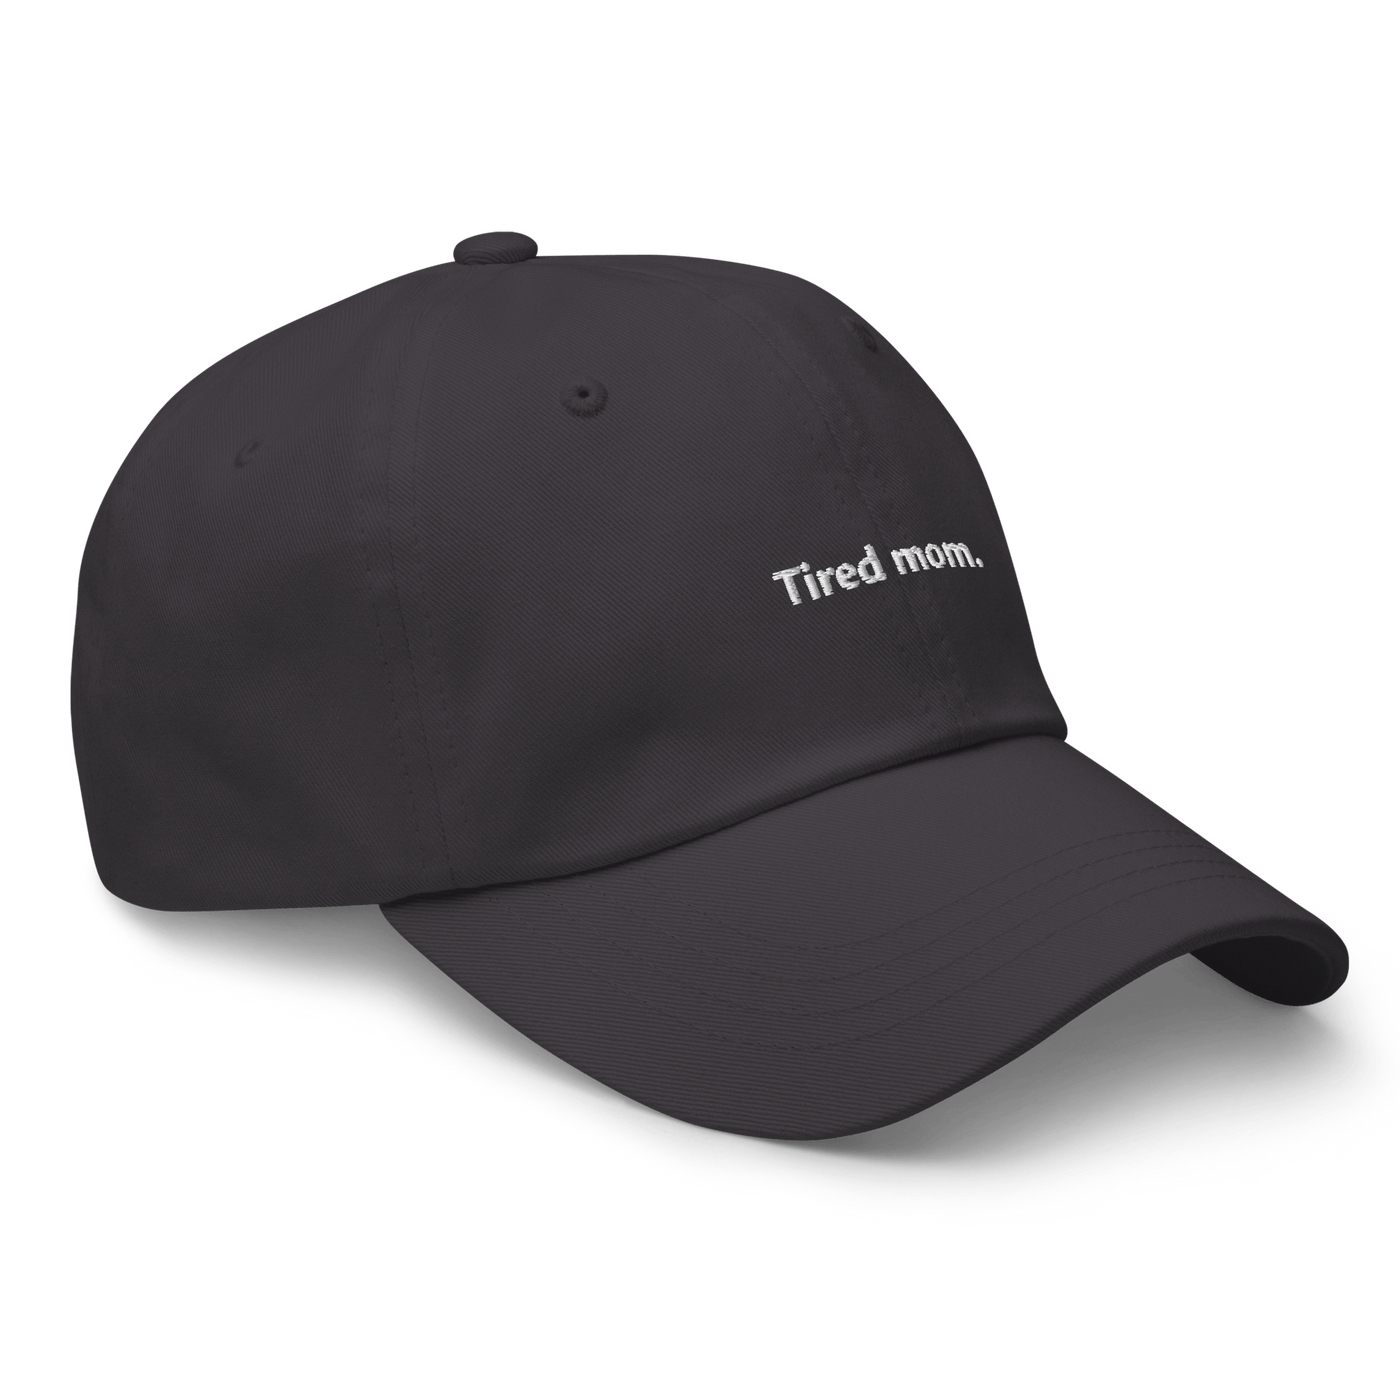 Tired mom Dad hat - Dark Grey - - Just Another Cap Store